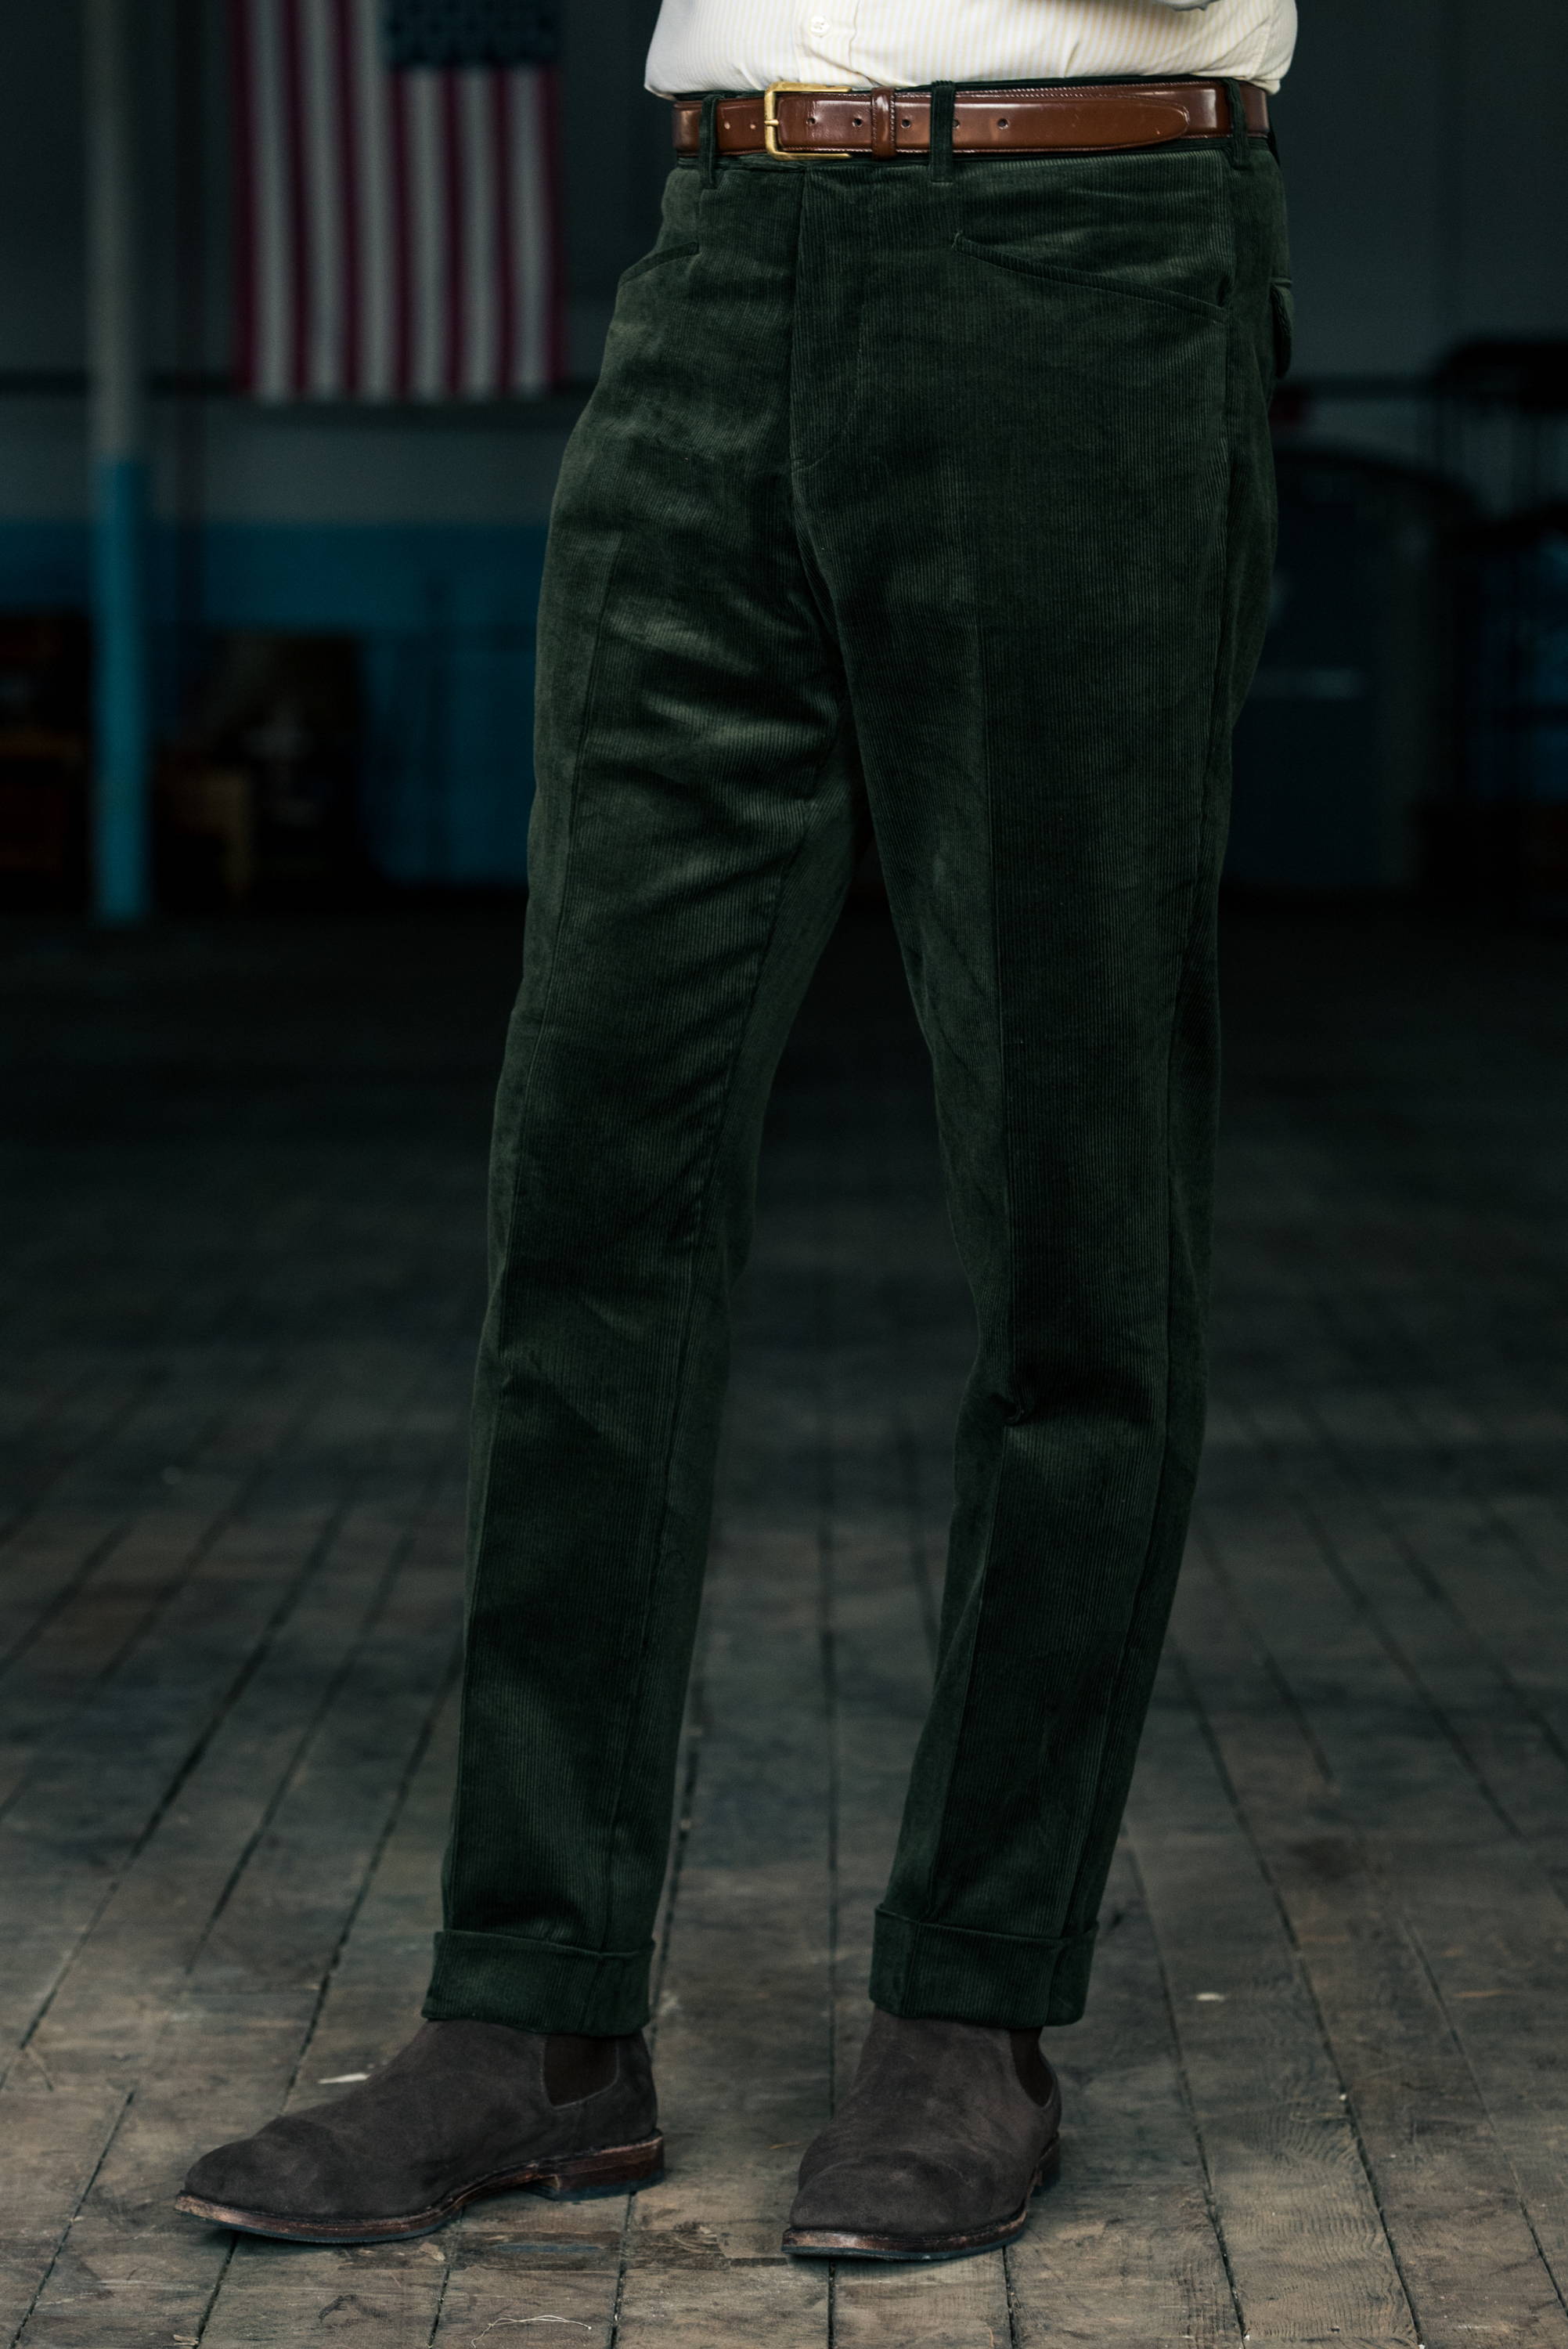 Articles of Style  HOW IT SHOULD FIT: THE TROUSER